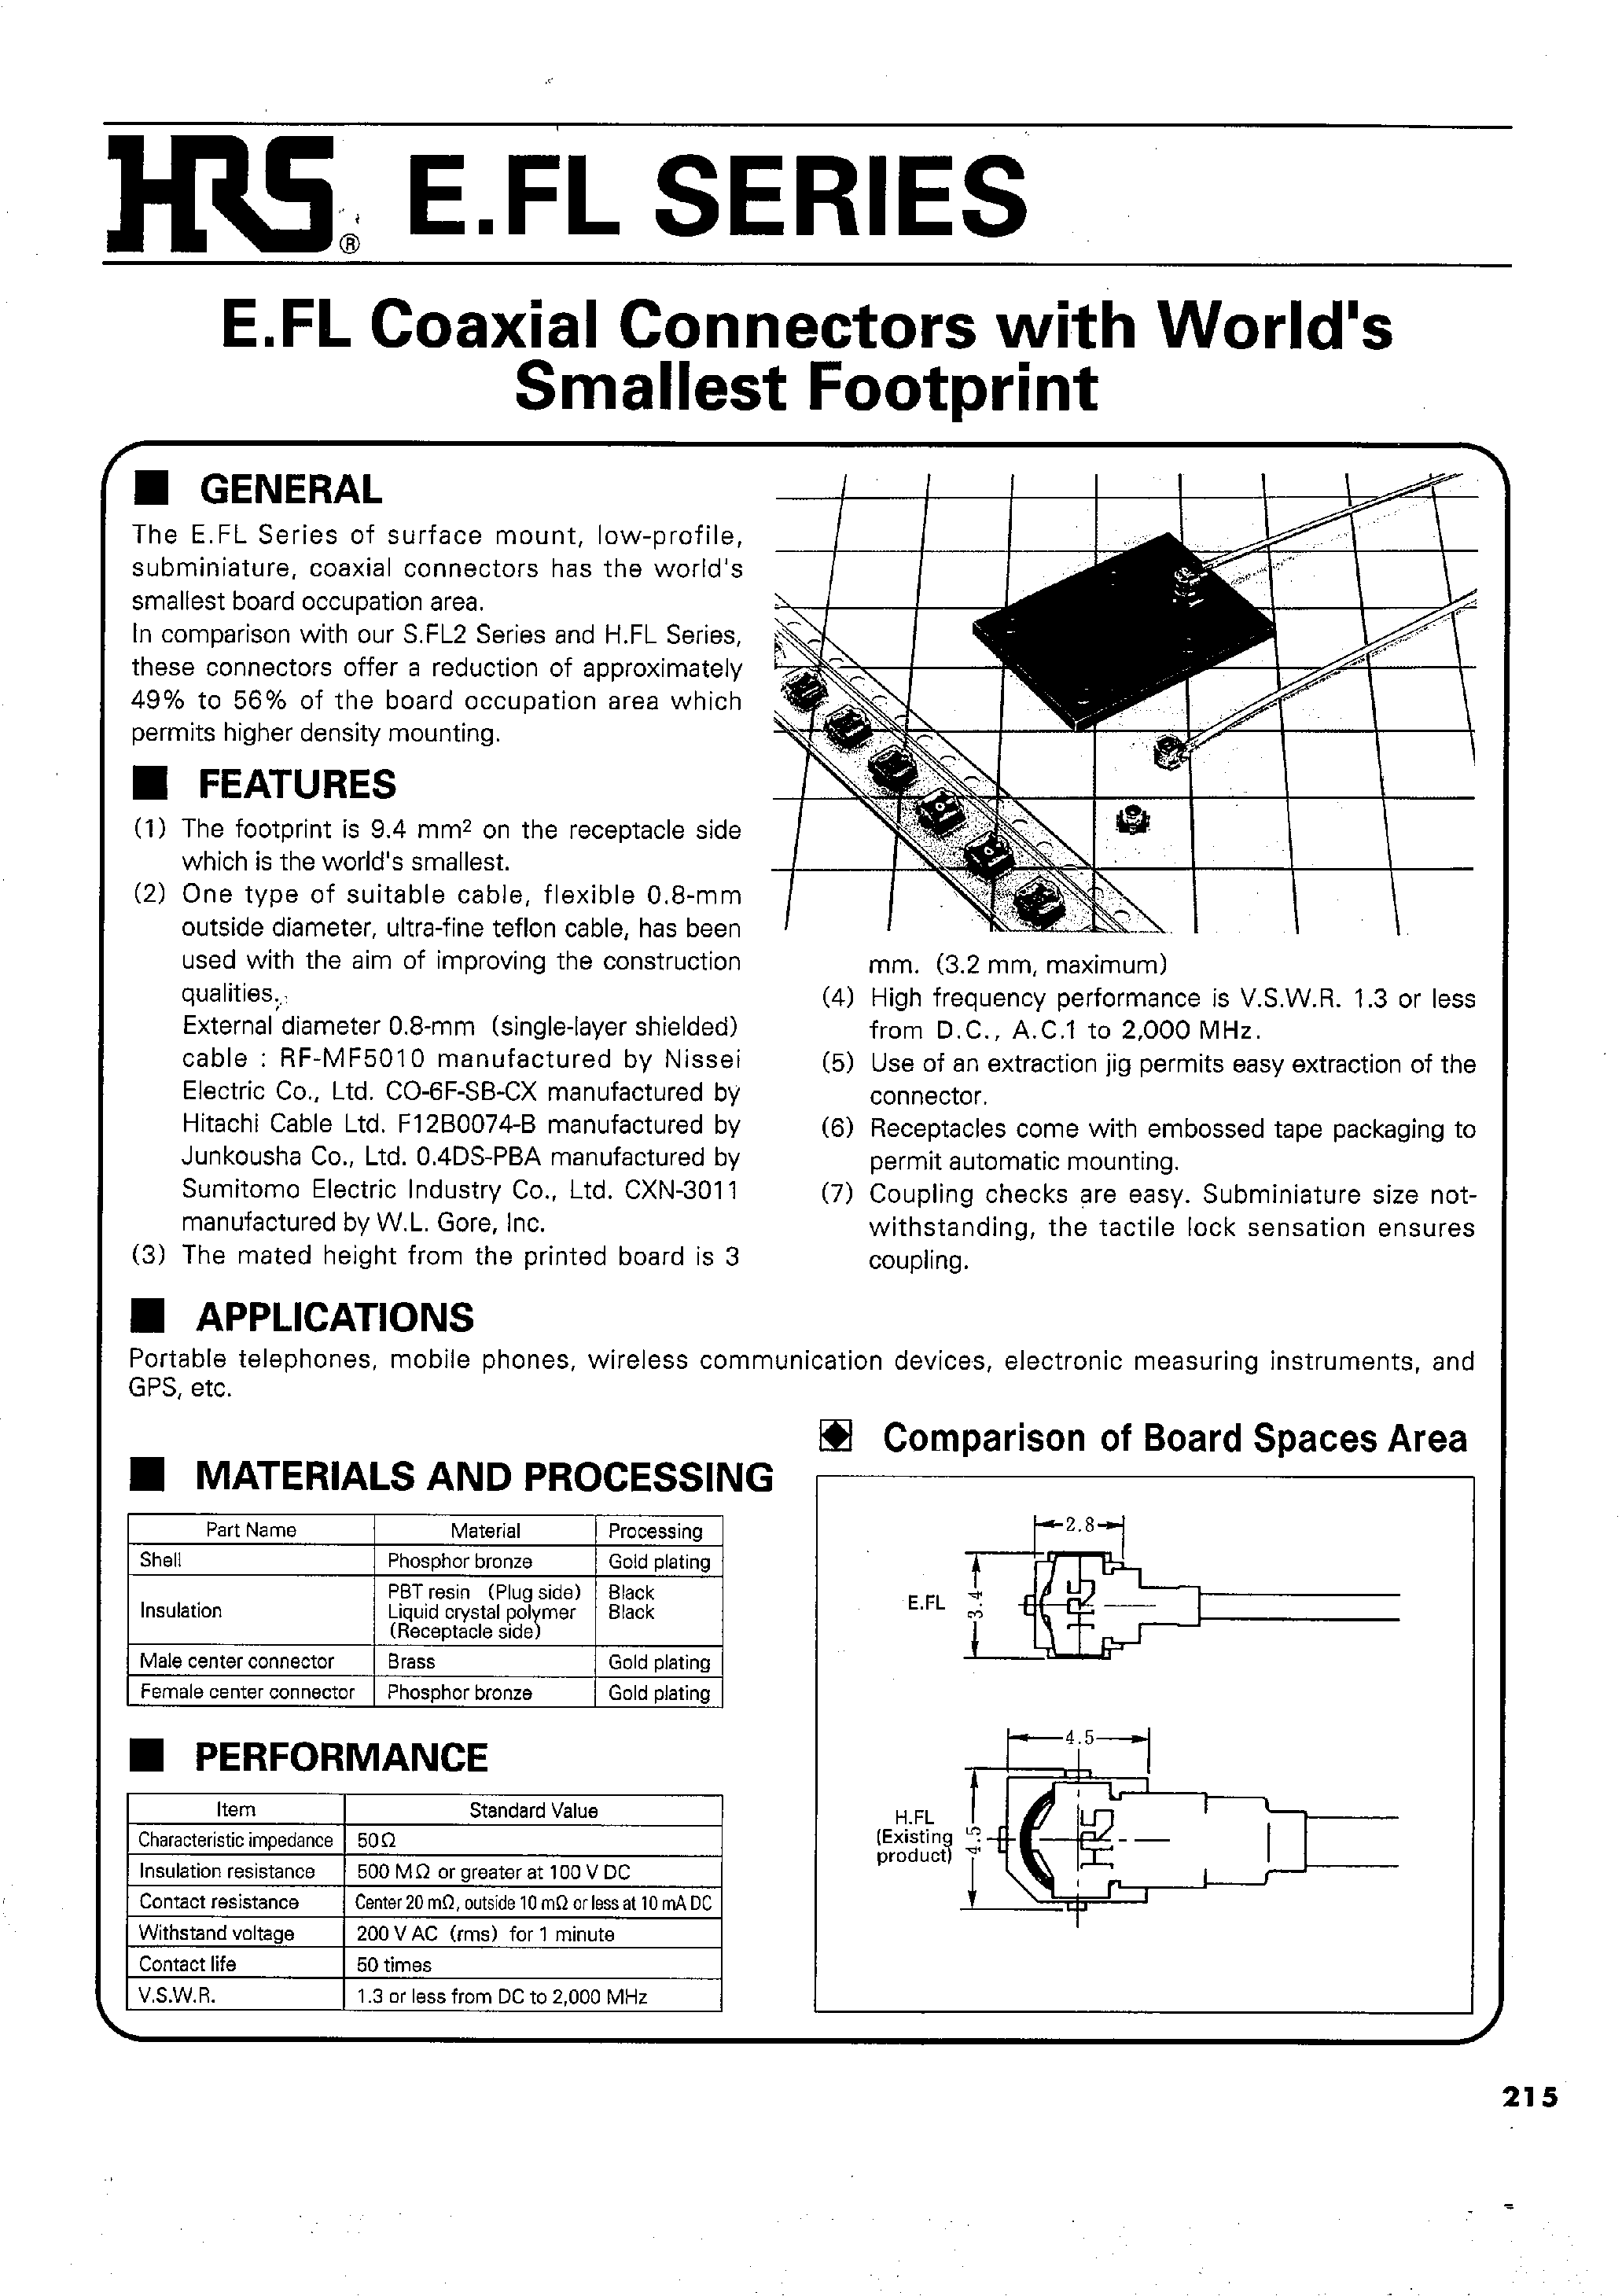 Datasheet E.FL-R-N - E.FL Coaxial Connectors with World Smallest Footprint page 1